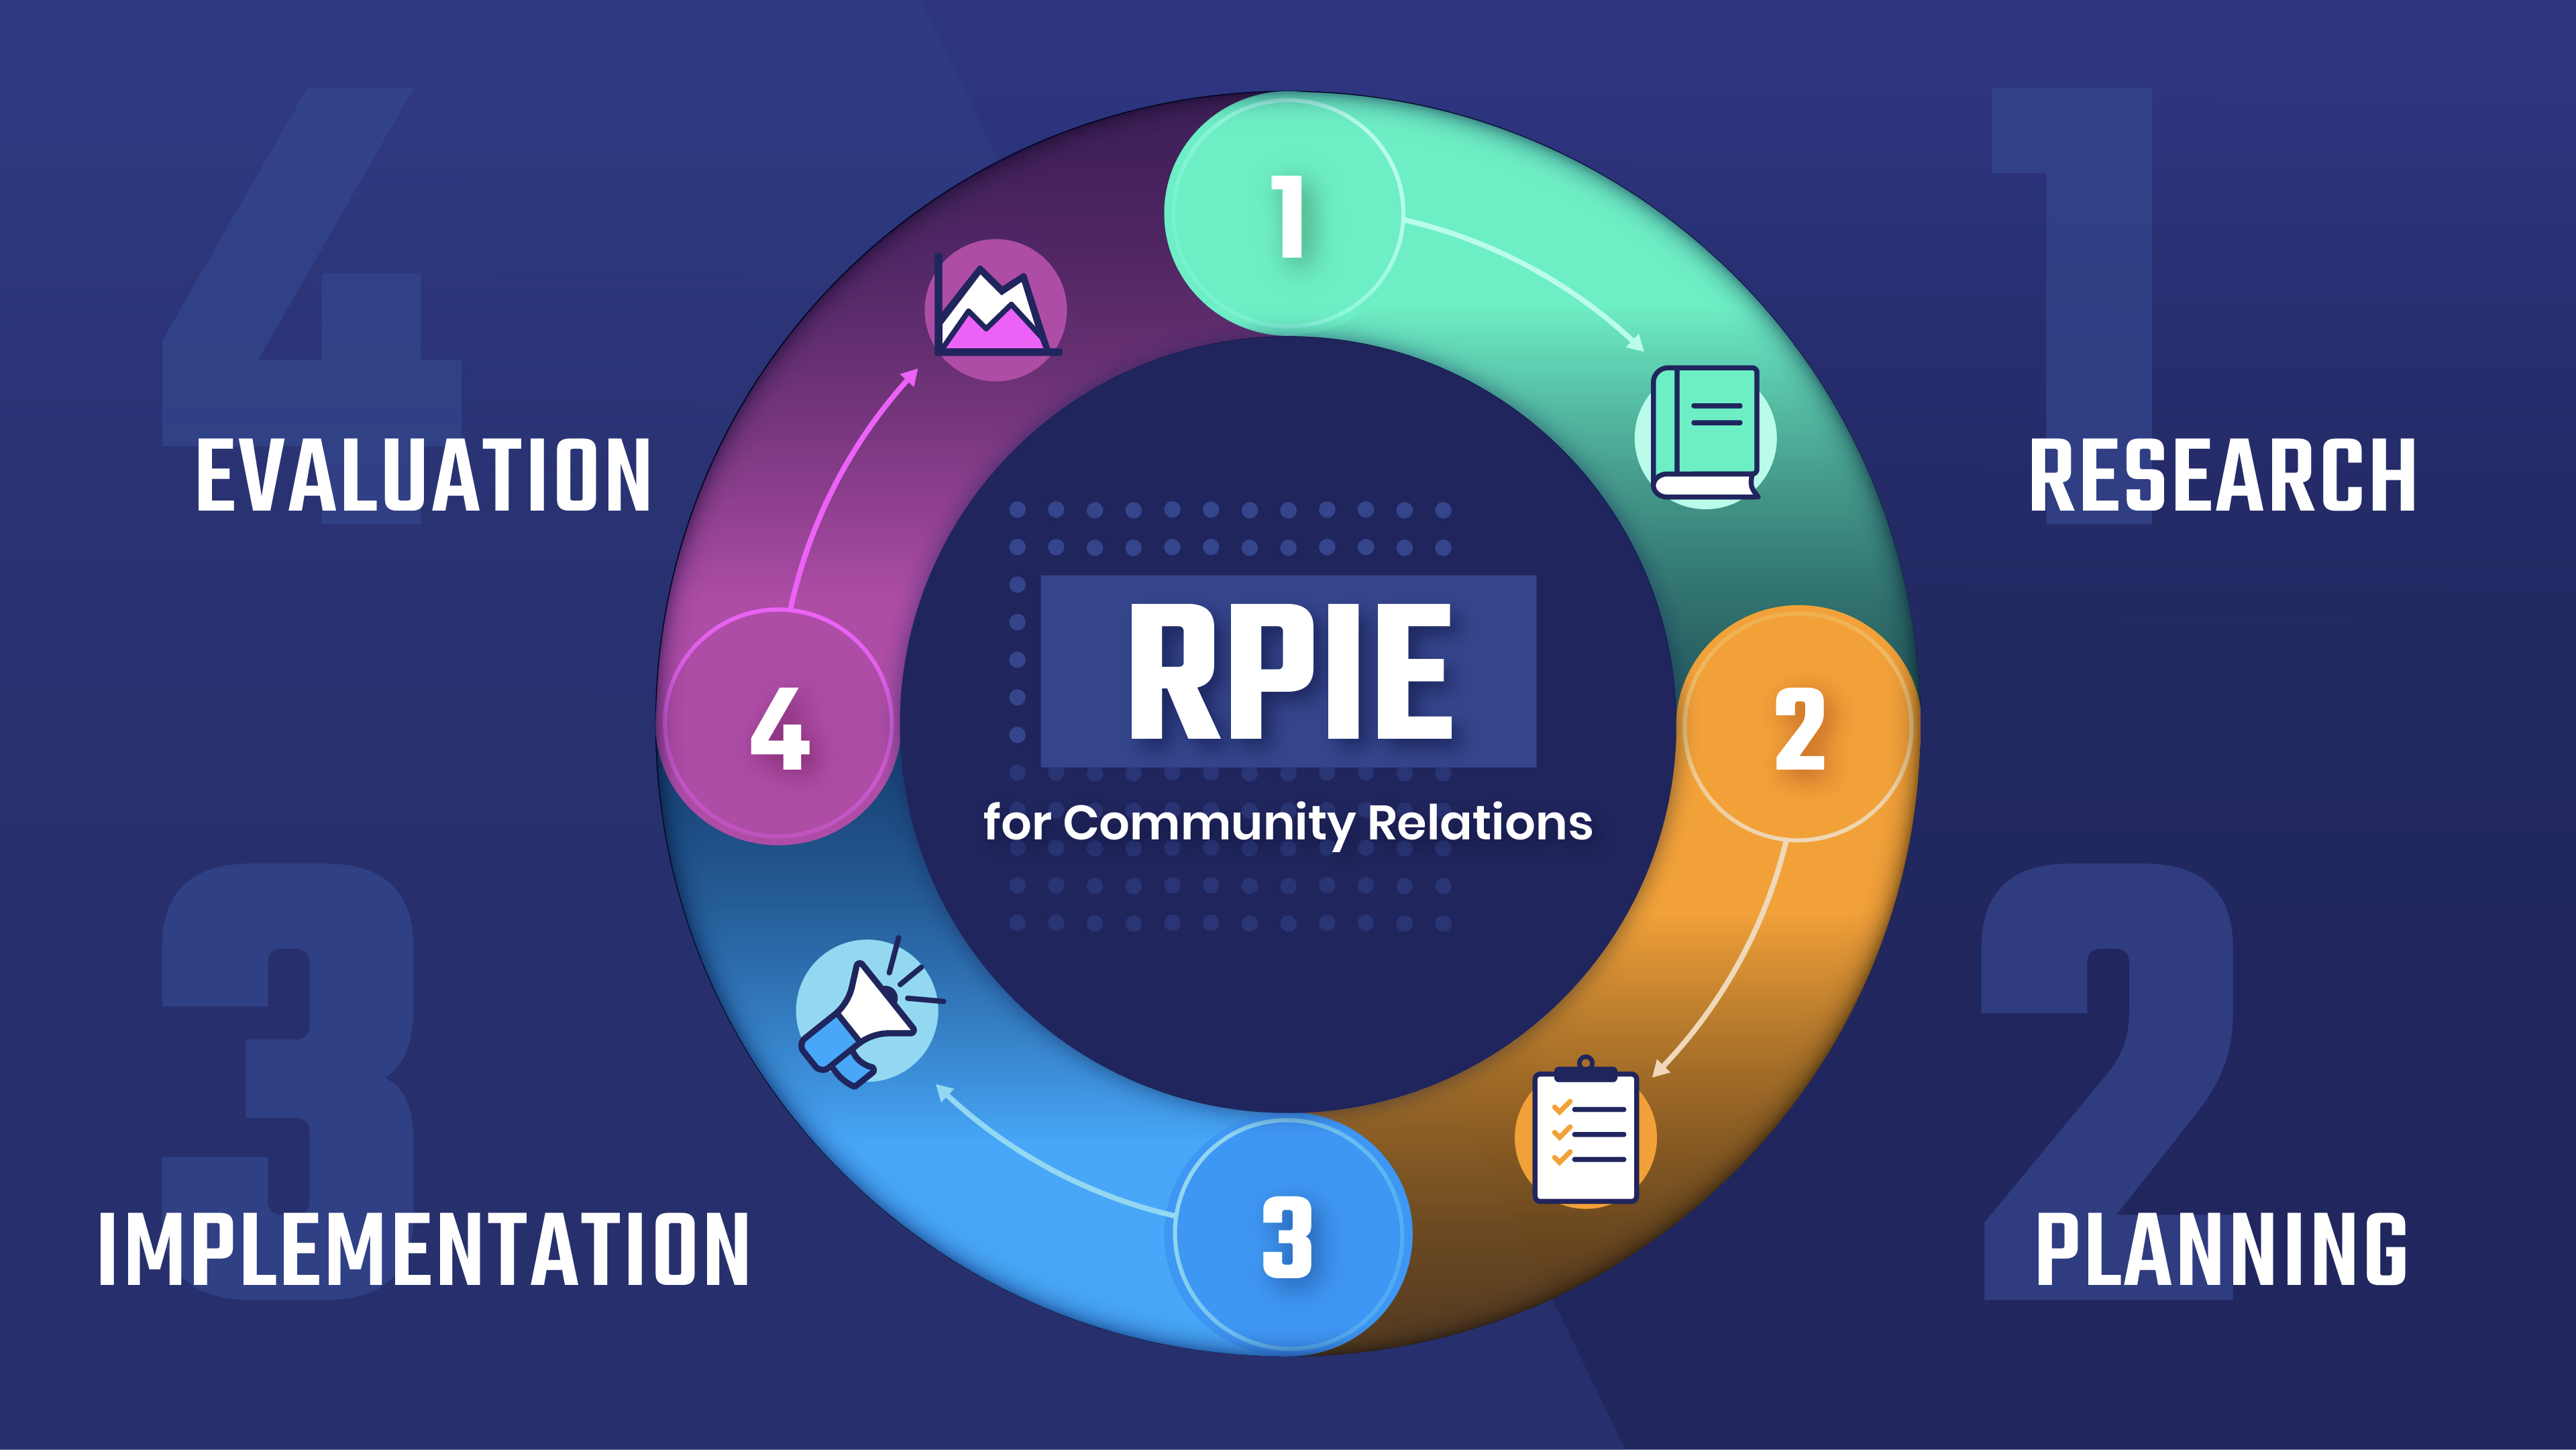 Circular process diagram for Community Relations using RPIE: 1 Research, 2 Planning, 3 Implementation and 4 Evaluation.